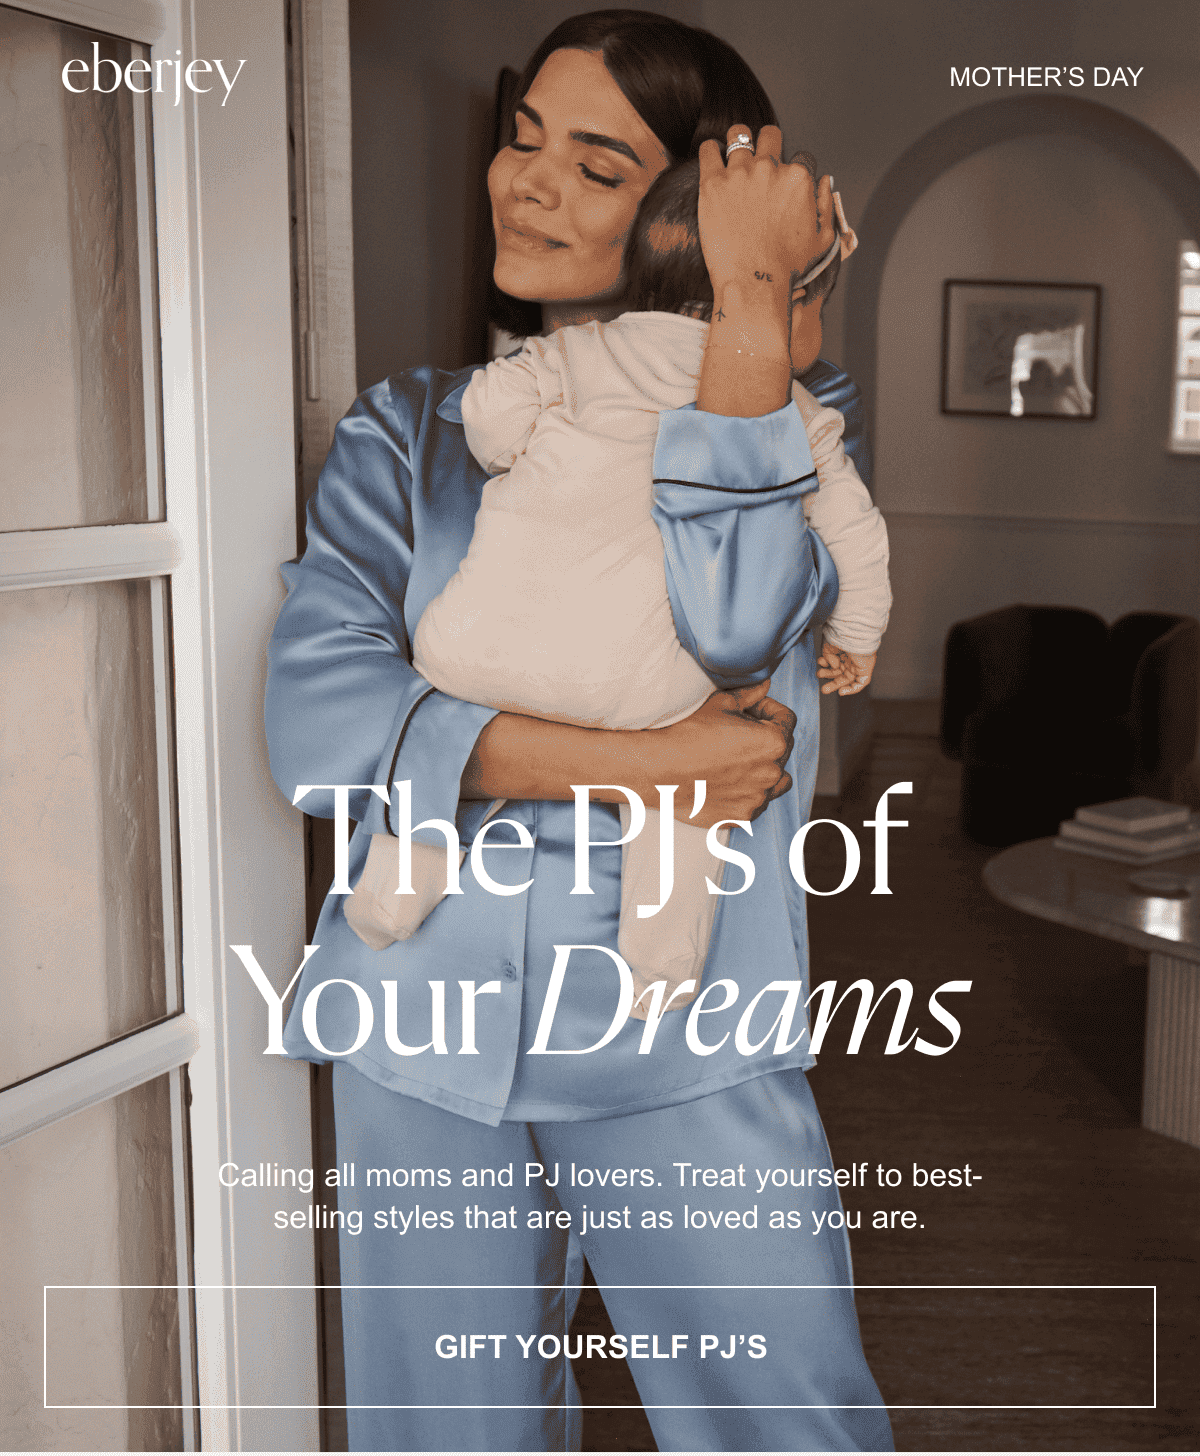 eberjey | The PJ's of Your Dreams